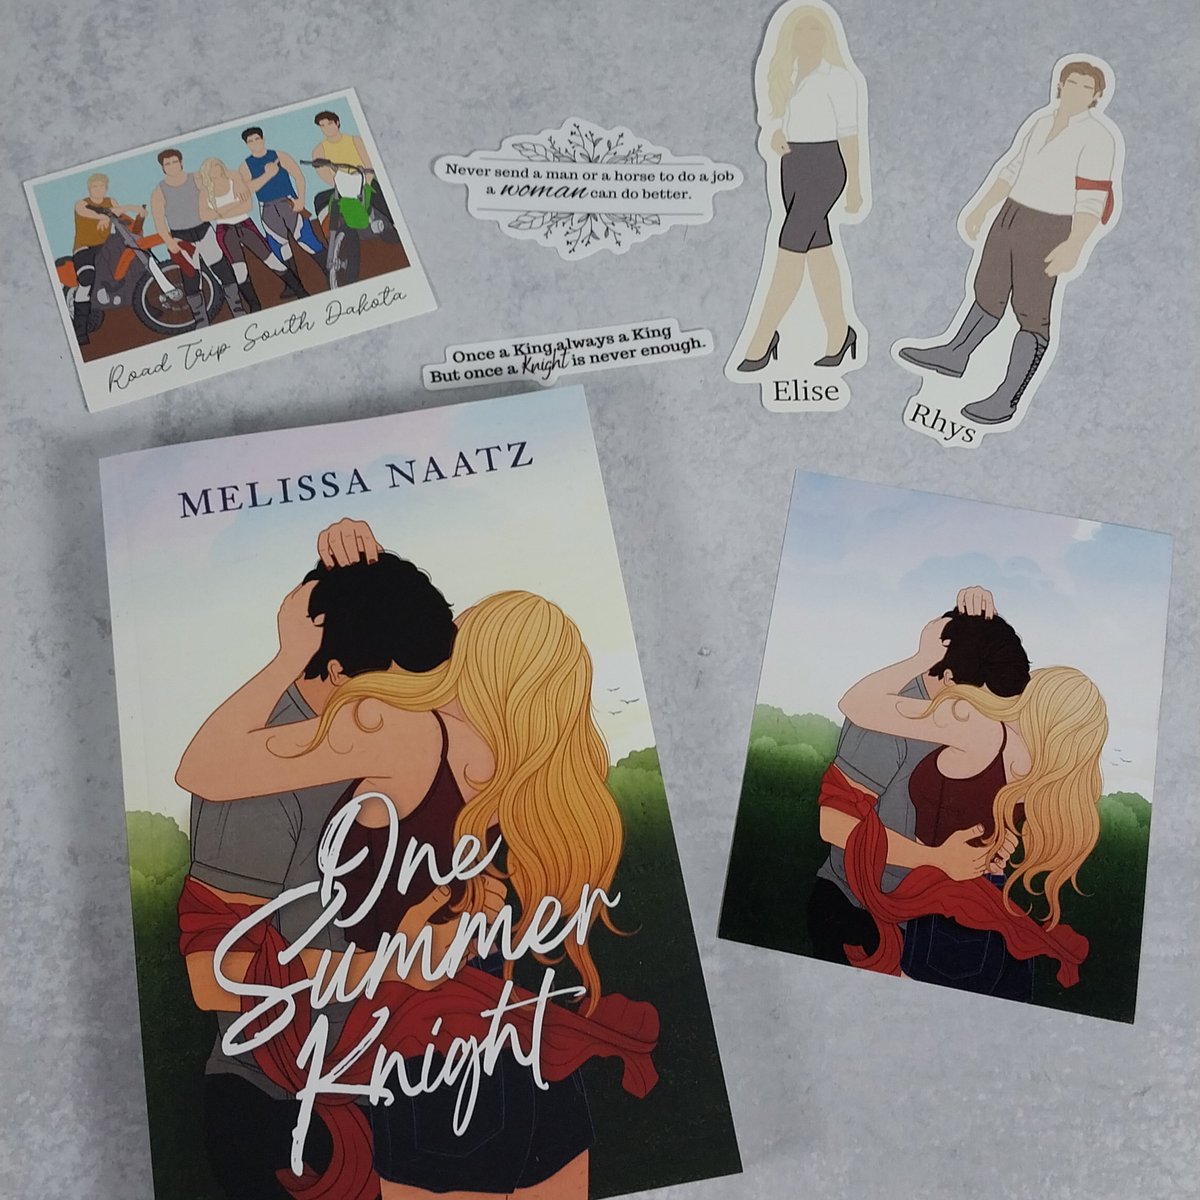 At thirty-eight-years-old Elise White doesn’t believe in happy endings. Just endings. One Summer Knight by Melissa Naatz   amzn.to/3w3aQ1t #gifted #onesummeknight #thenerdfam